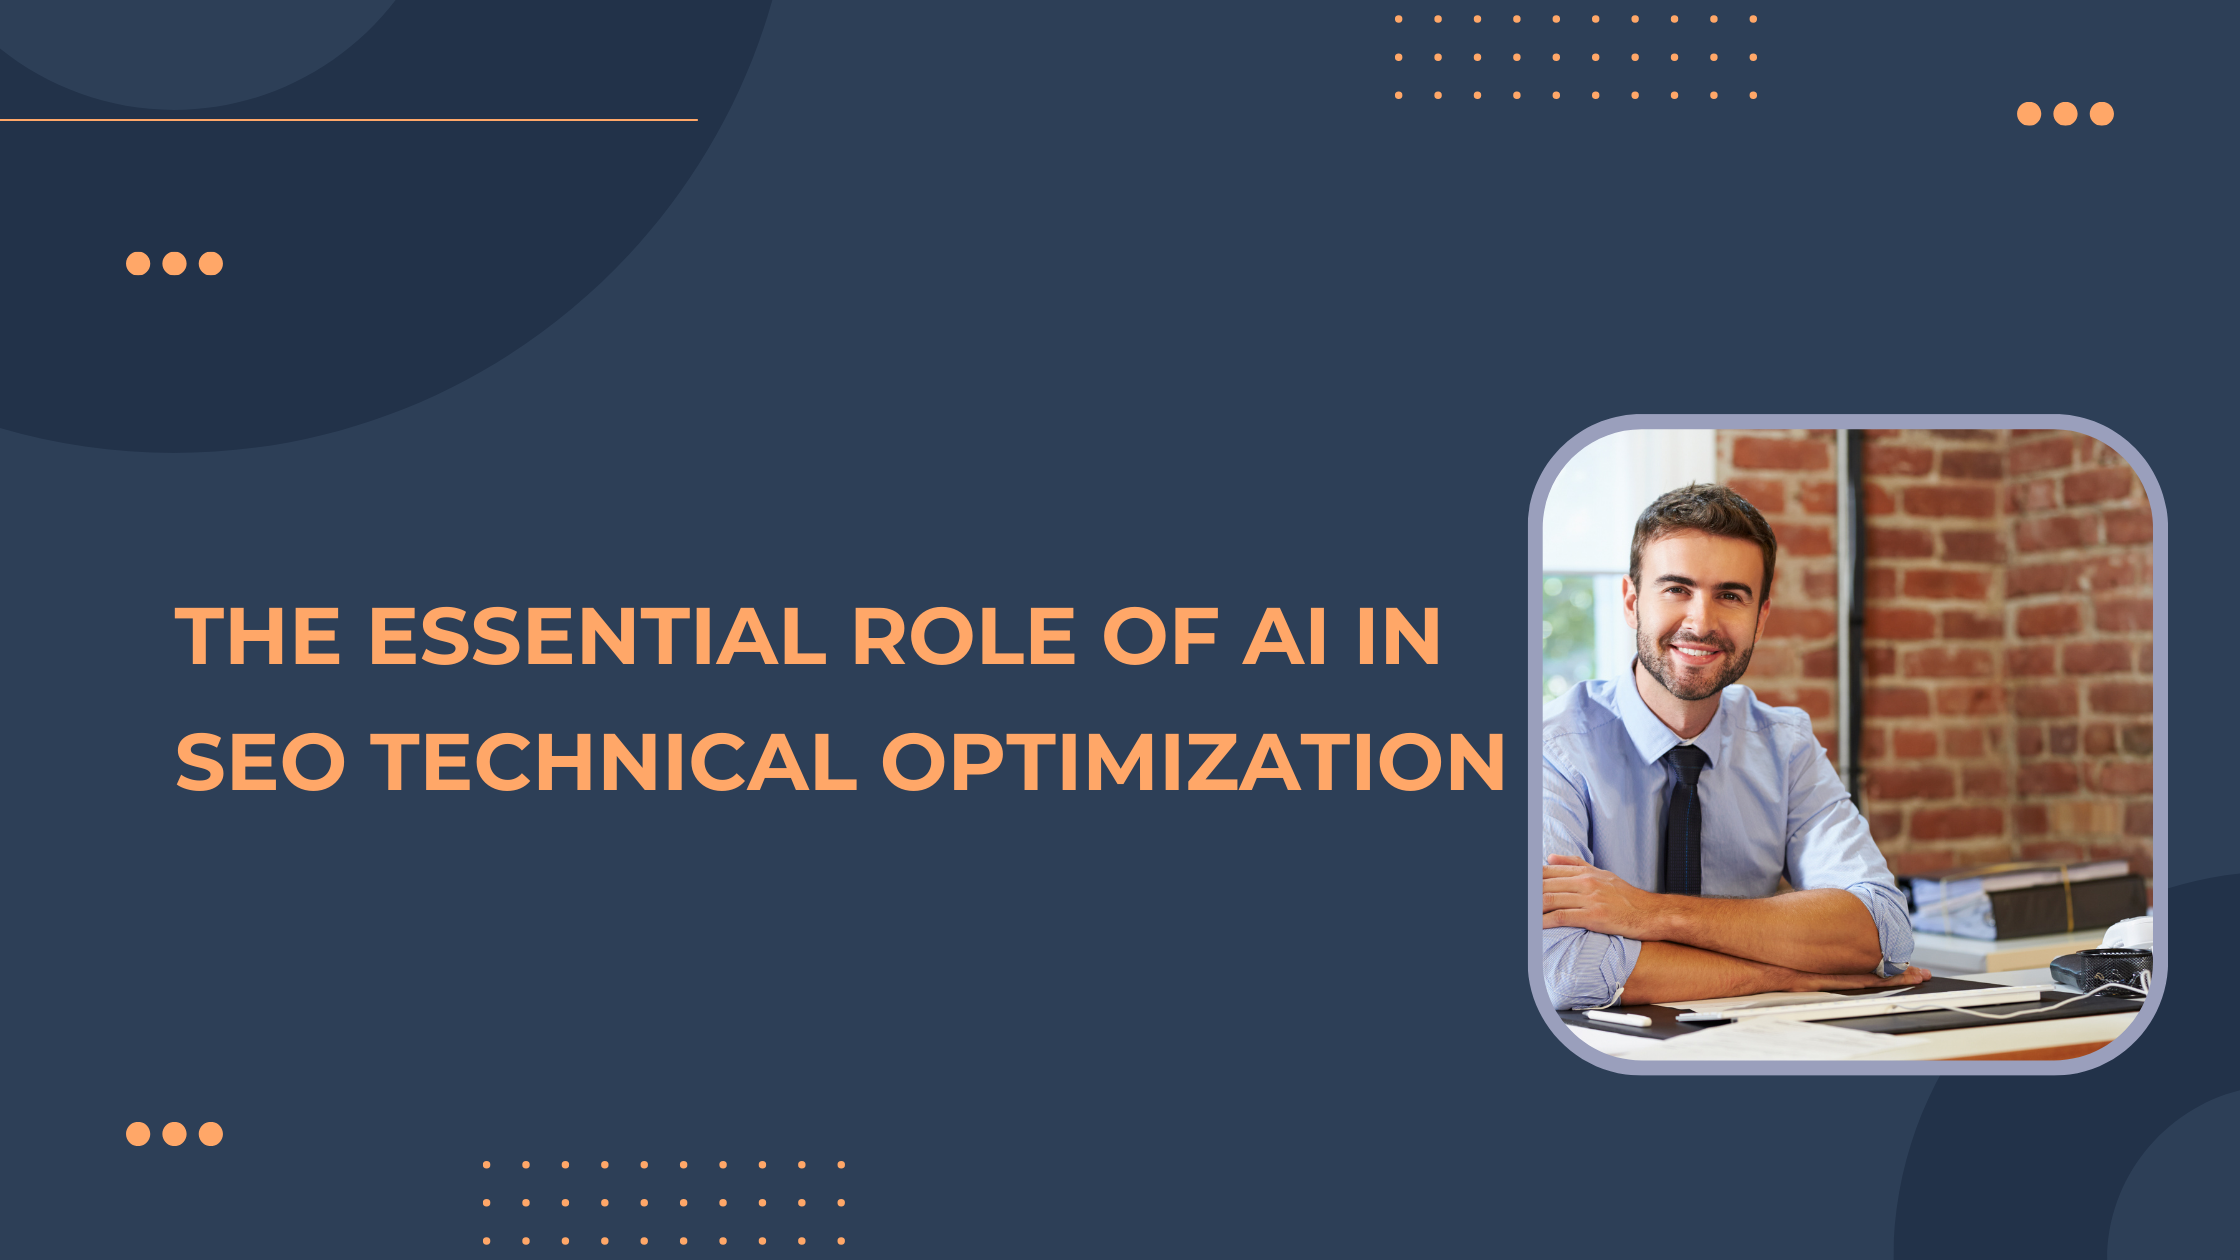 The Essential Role of AI in SEO Technical Optimization